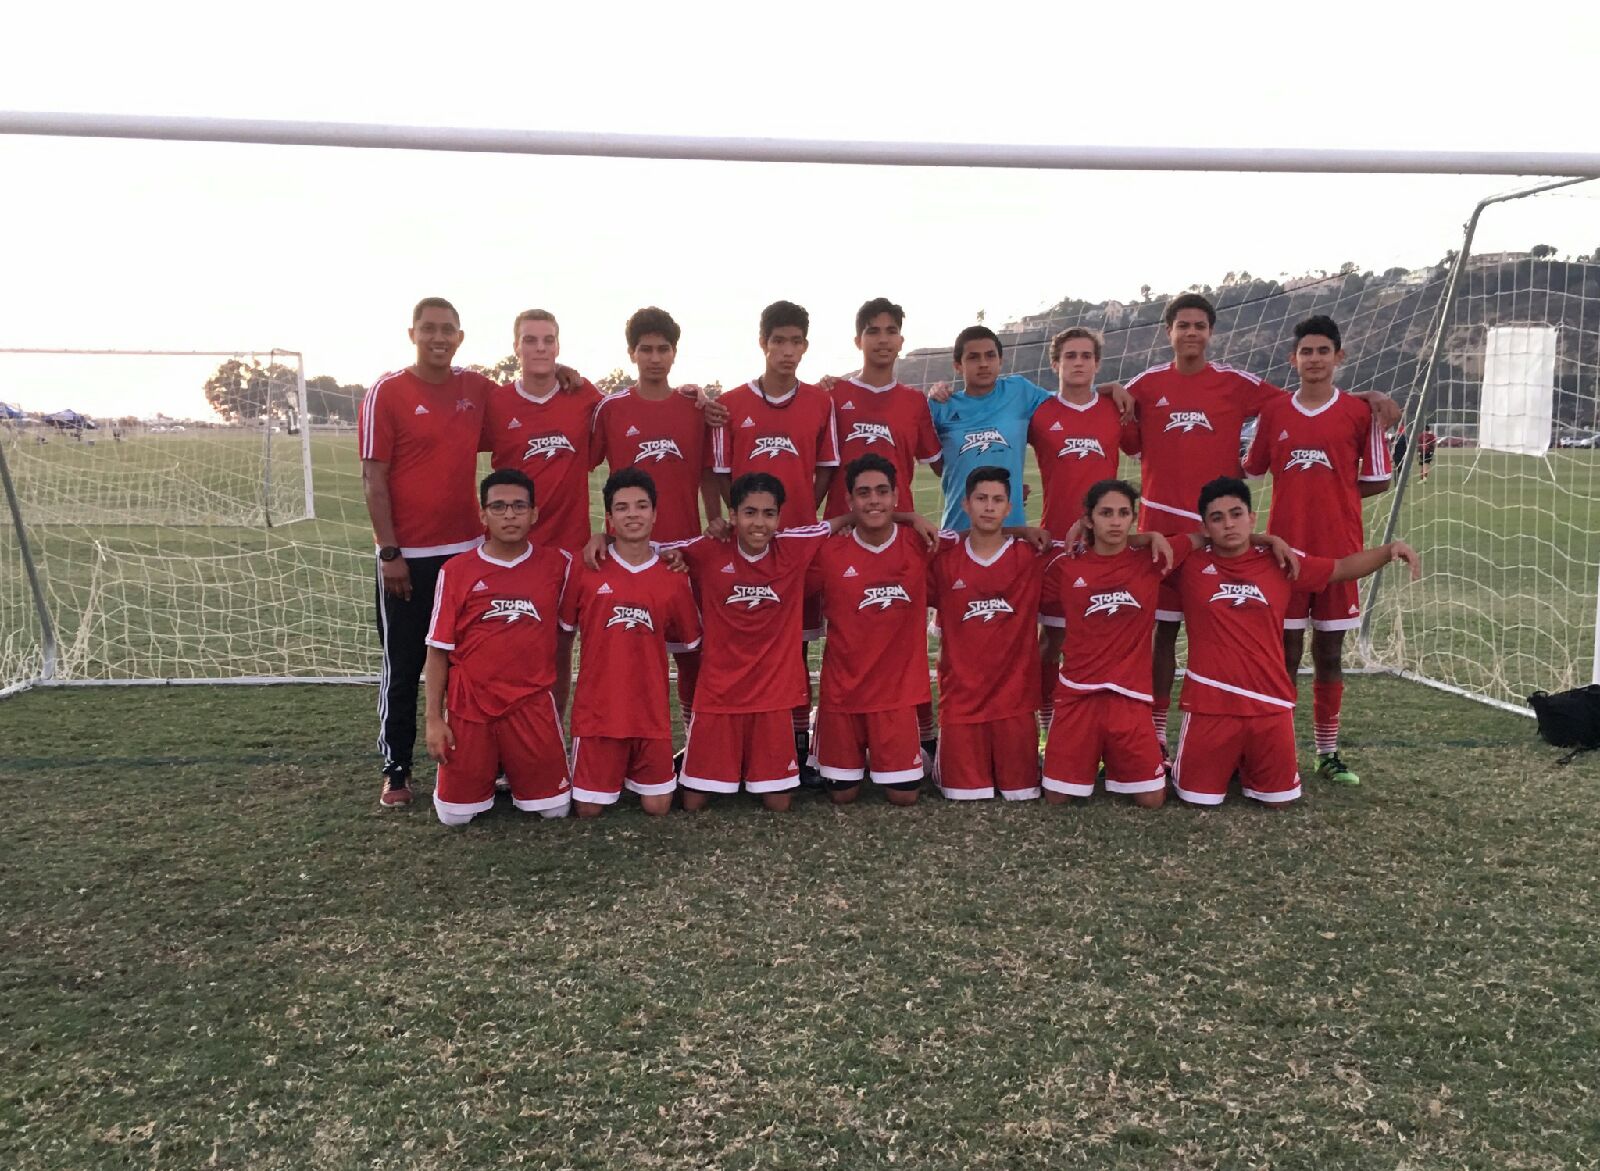 2000 Boys Advance to Semi-finals at Nomads Thanksgiving Tournament